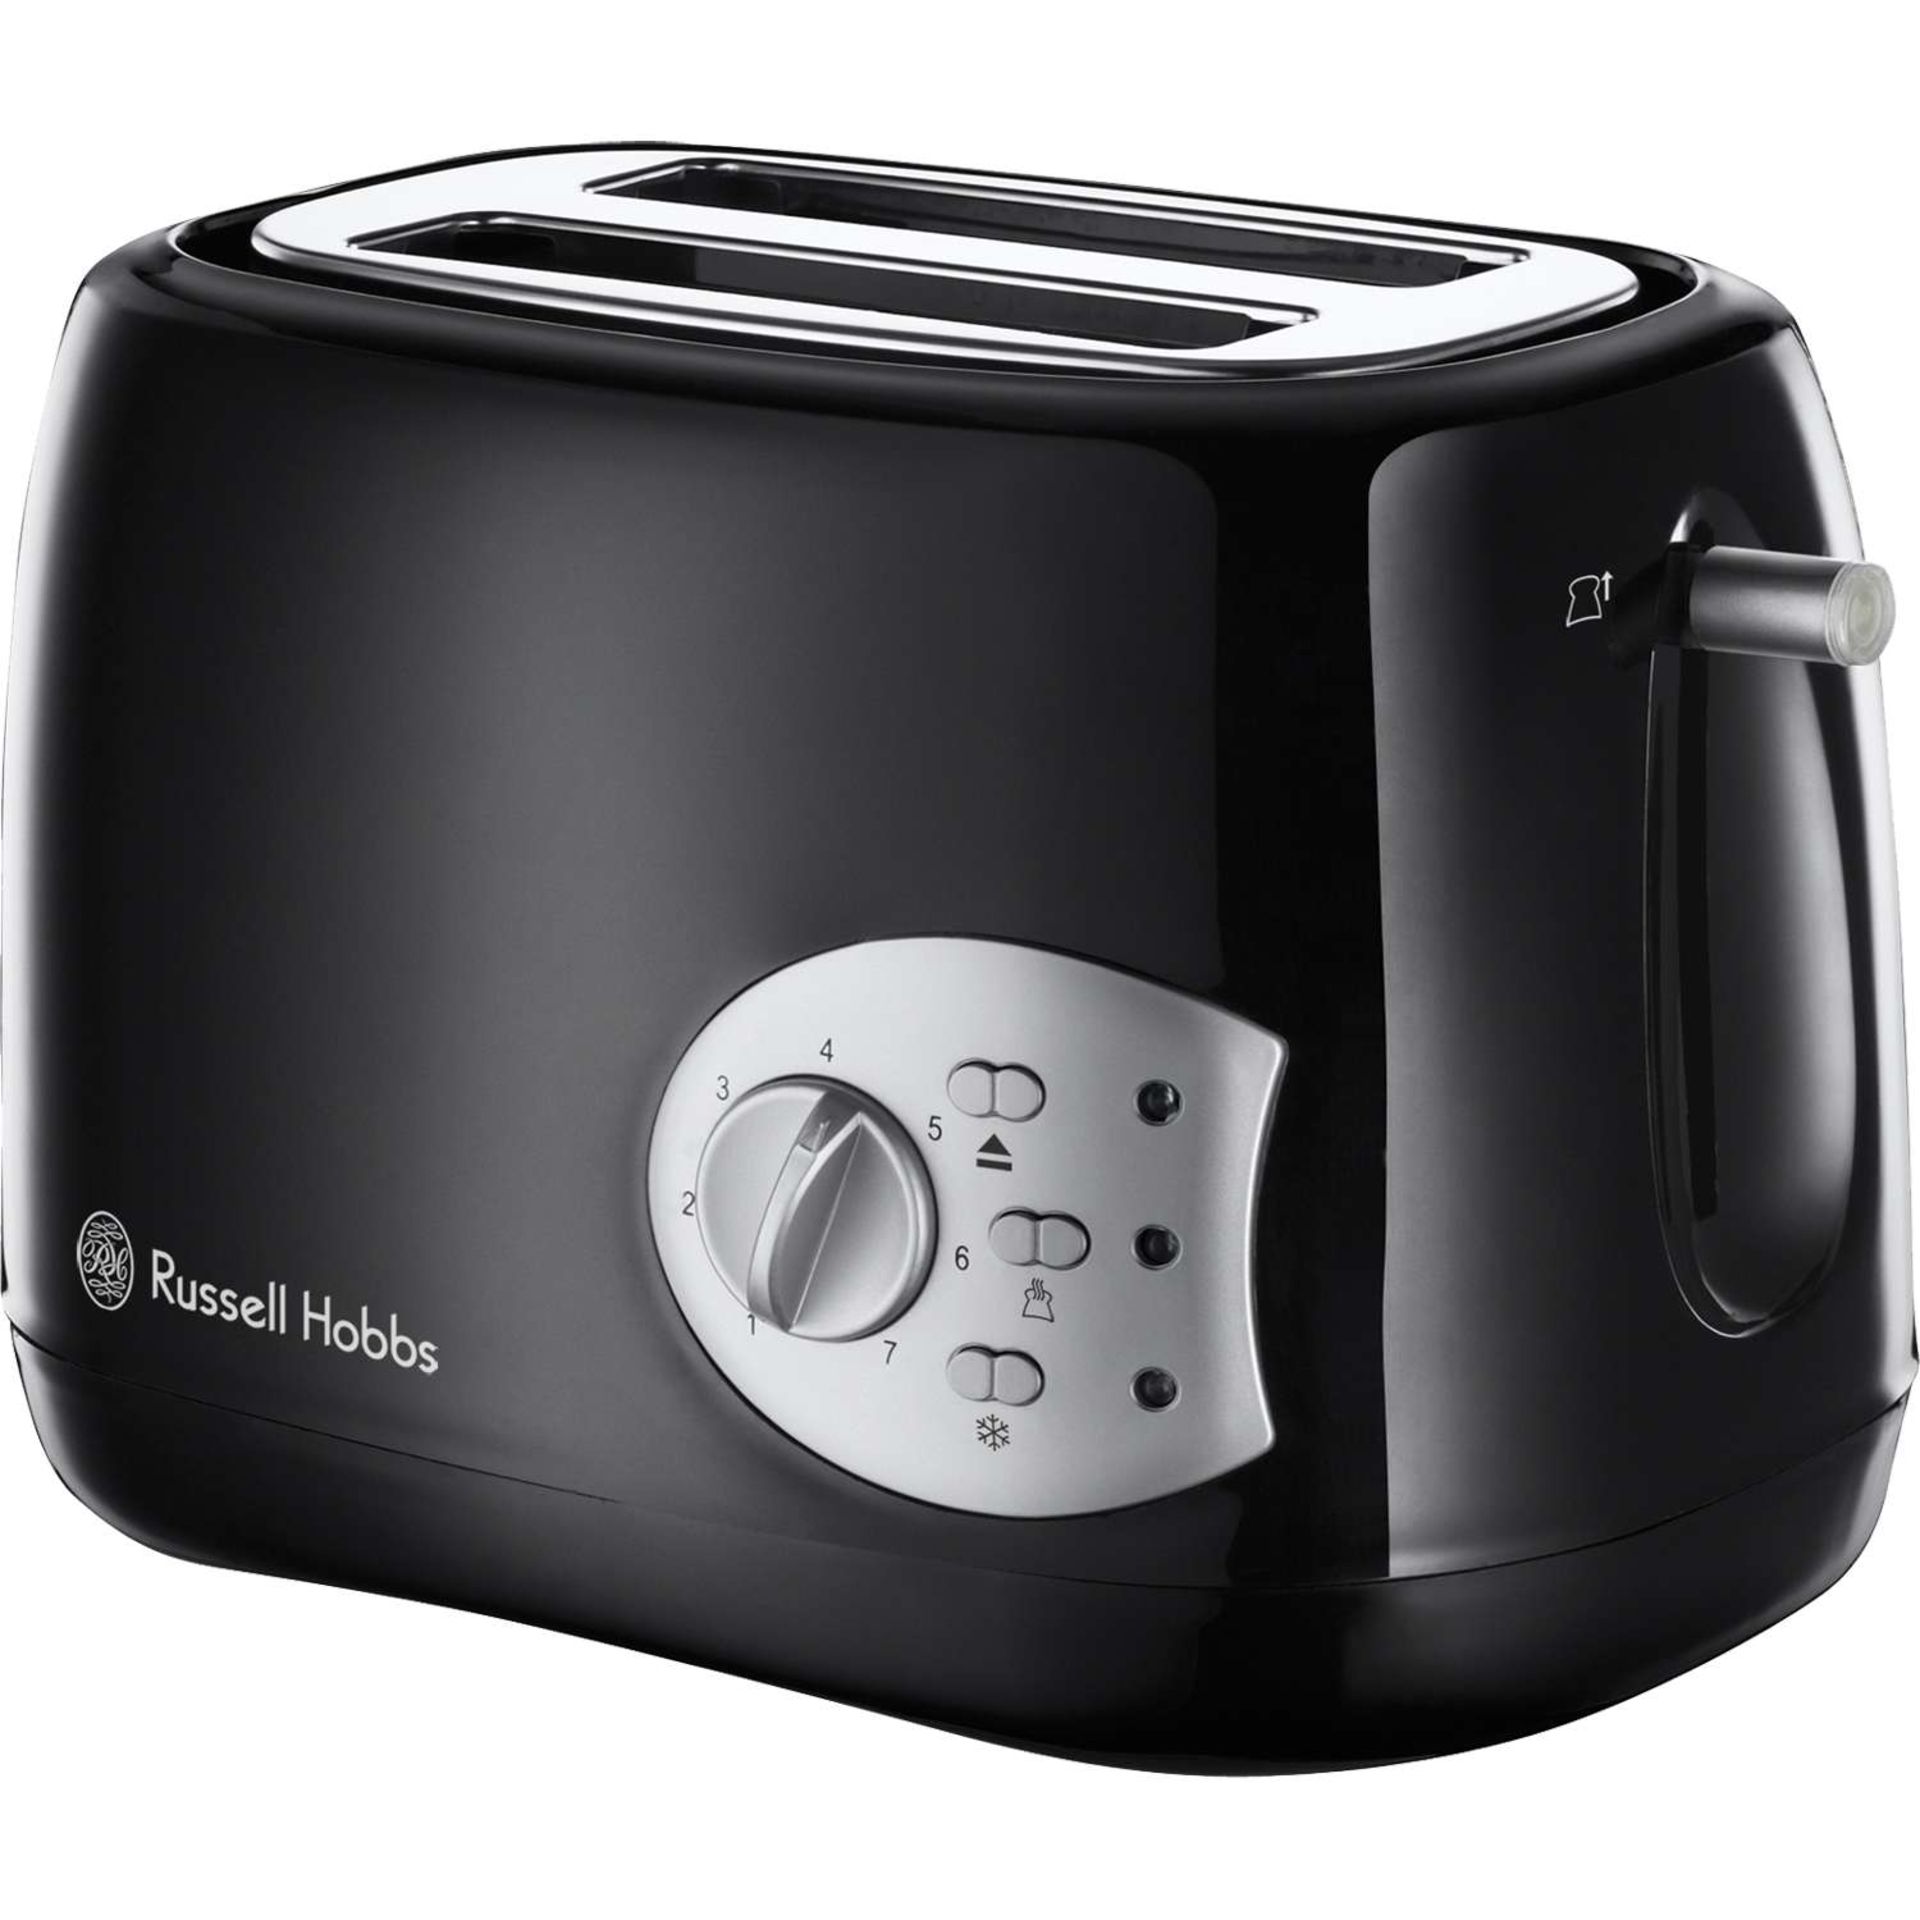 V Brand New Russell Hobbs Two Slice Toaster - With Reheat/Frozen/Cancel Features - Variable Browning